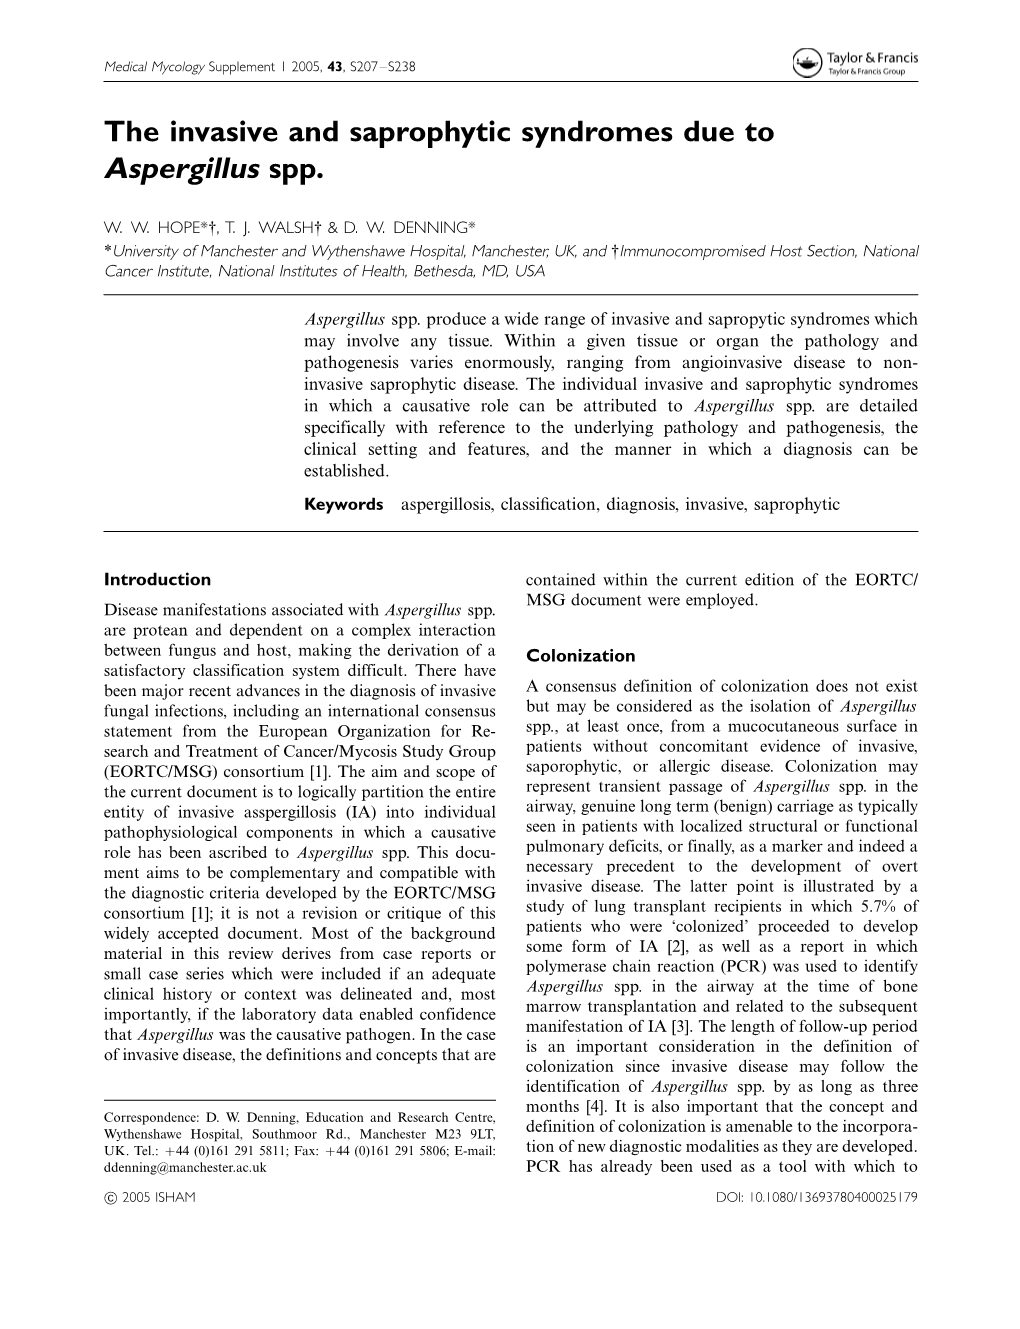 The Invasive and Saprophytic Syndromes Due to Aspergillus Spp